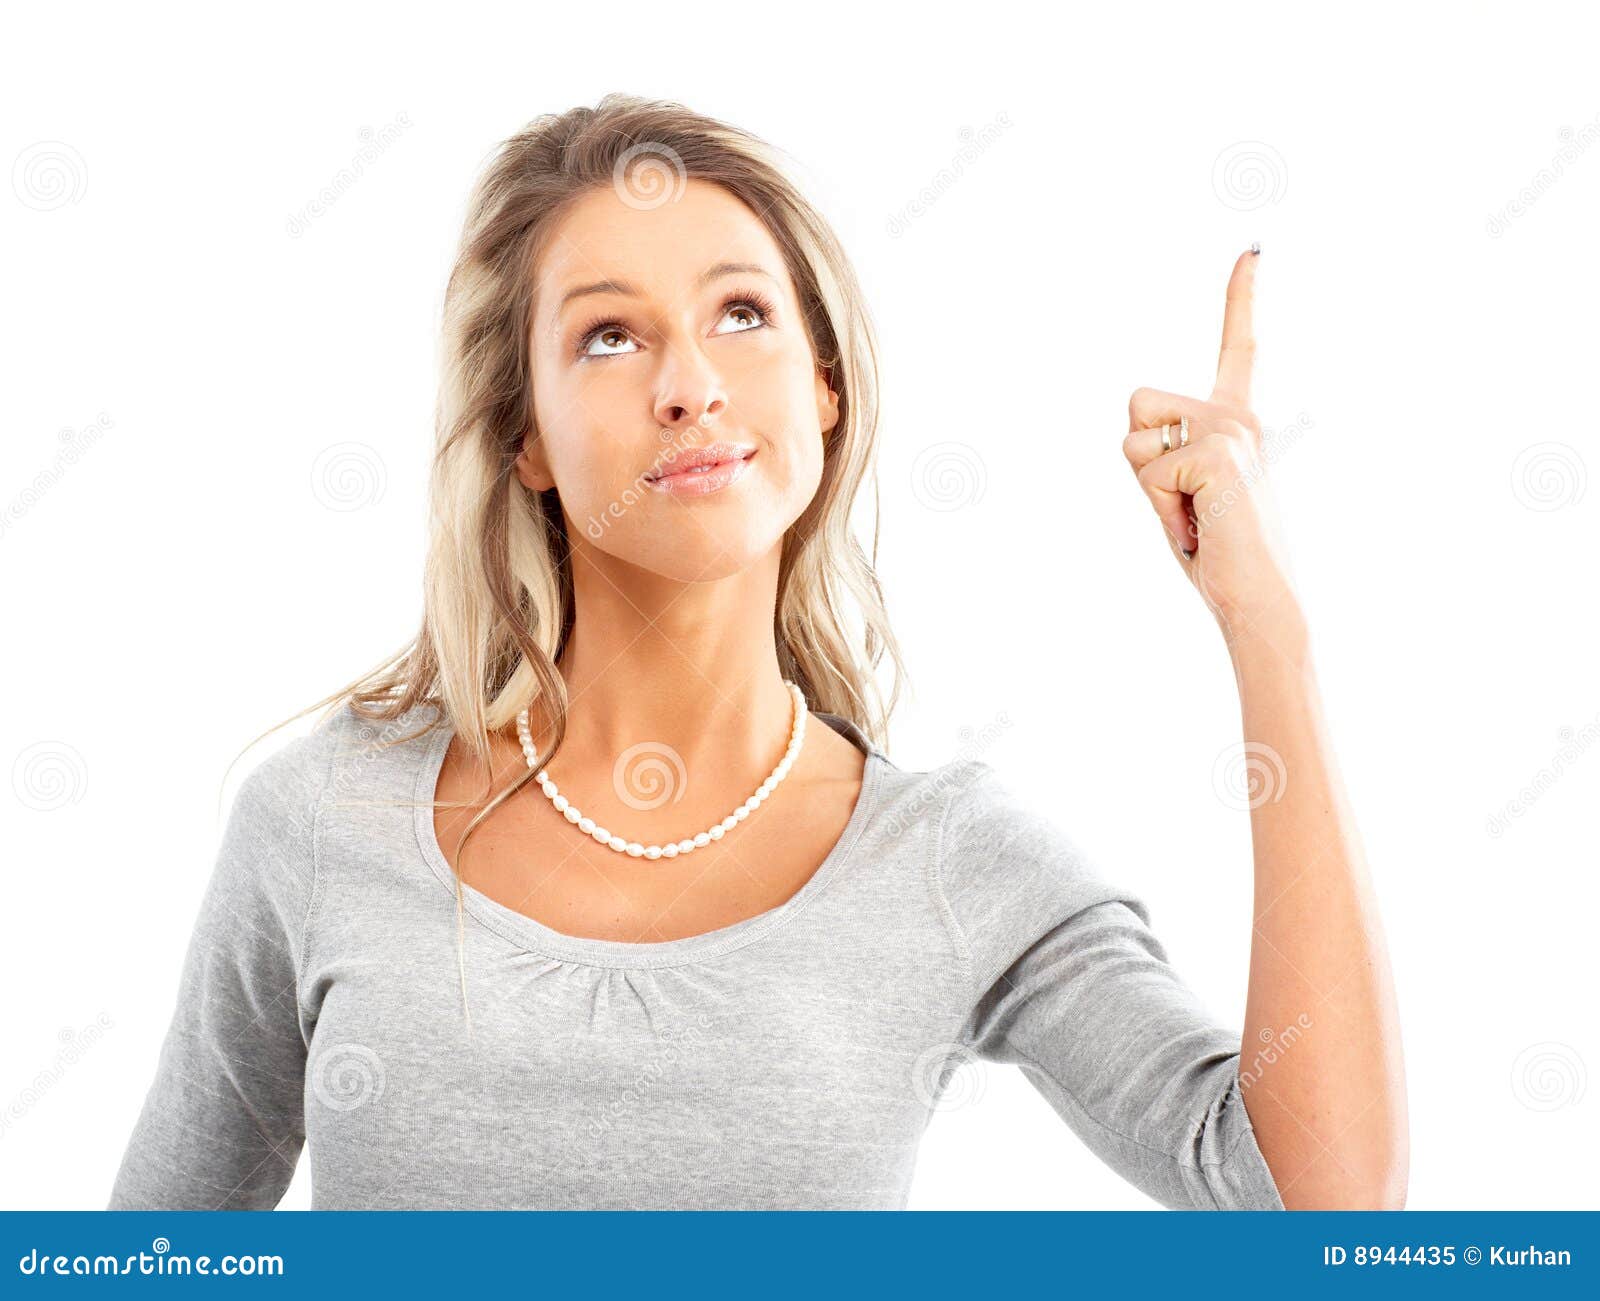 Dream stock image. Image of laugh, makeup, attantion, pointing - 8944435